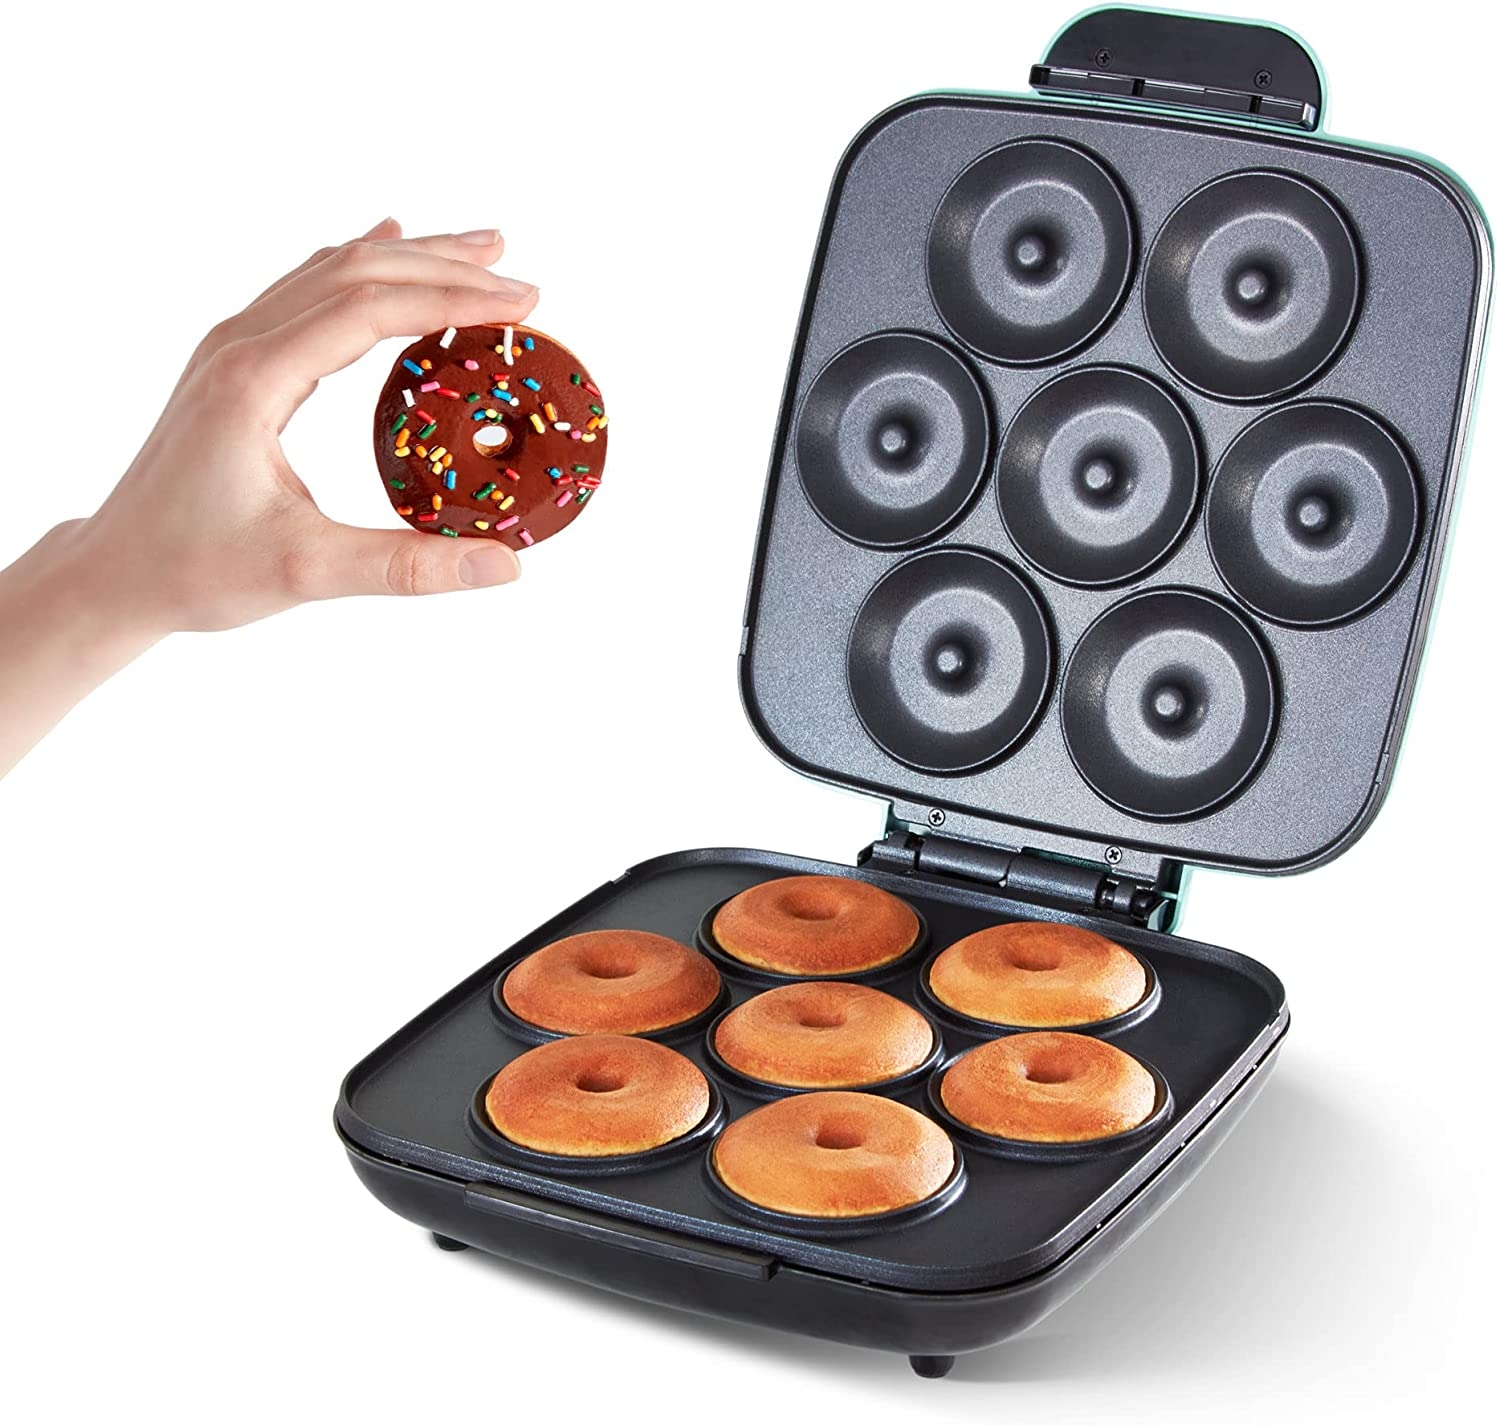 Delish By Dash Donut Maker, Makes 7 x 3″ Donuts with Delish Recipes for Snacks, Dessert, and More – Black Import To Shop